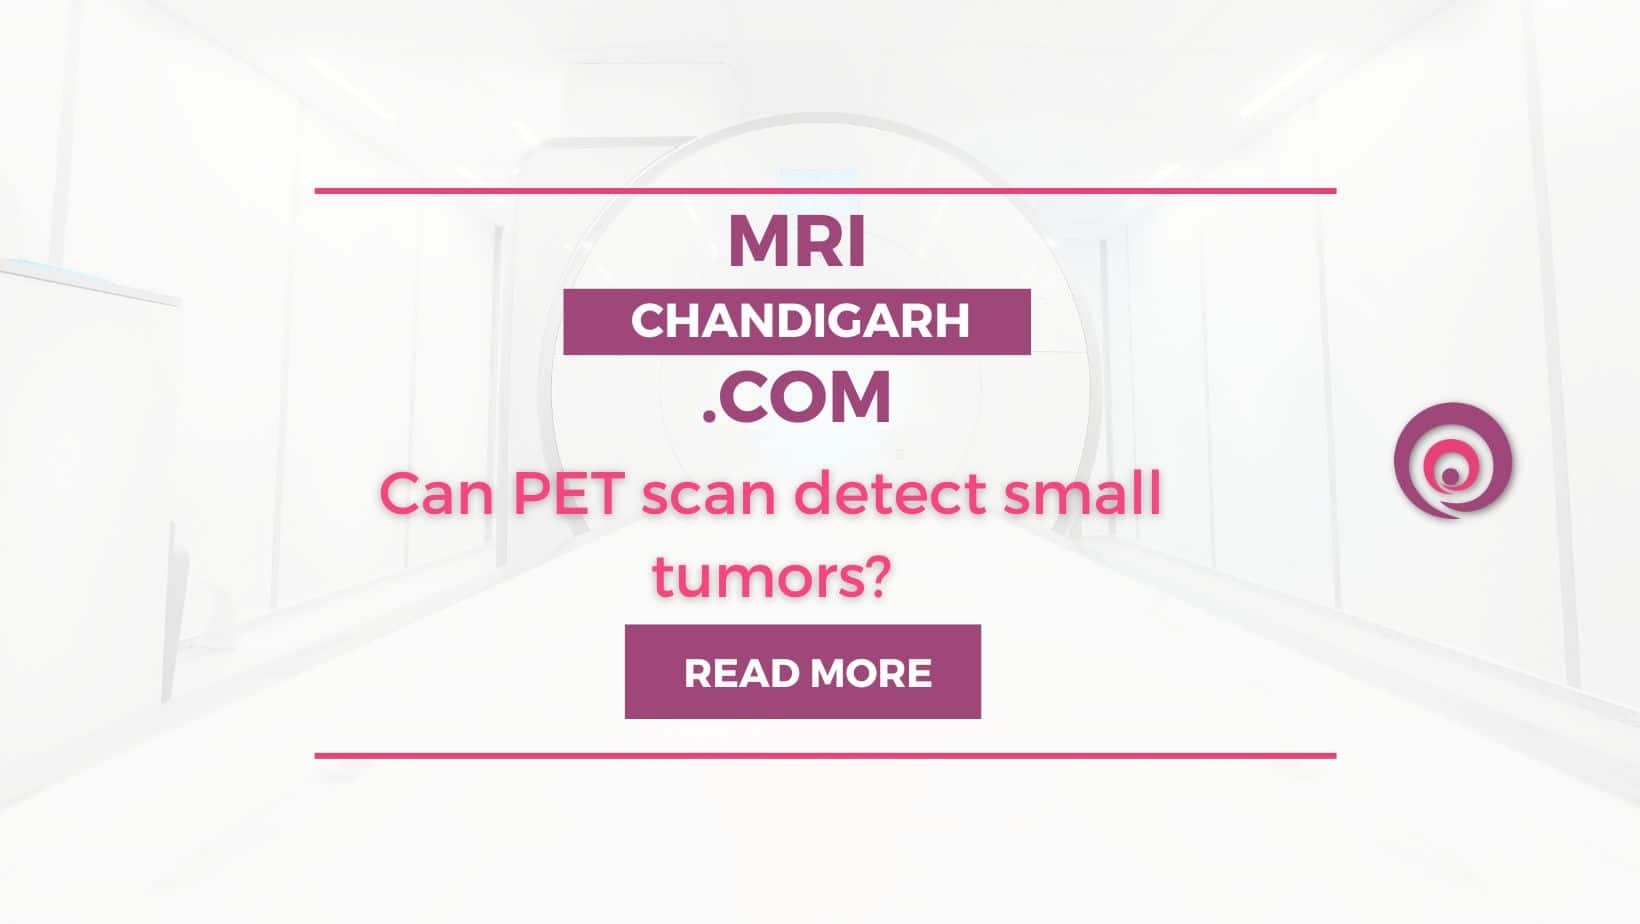 Can PET scan detect small tumors?